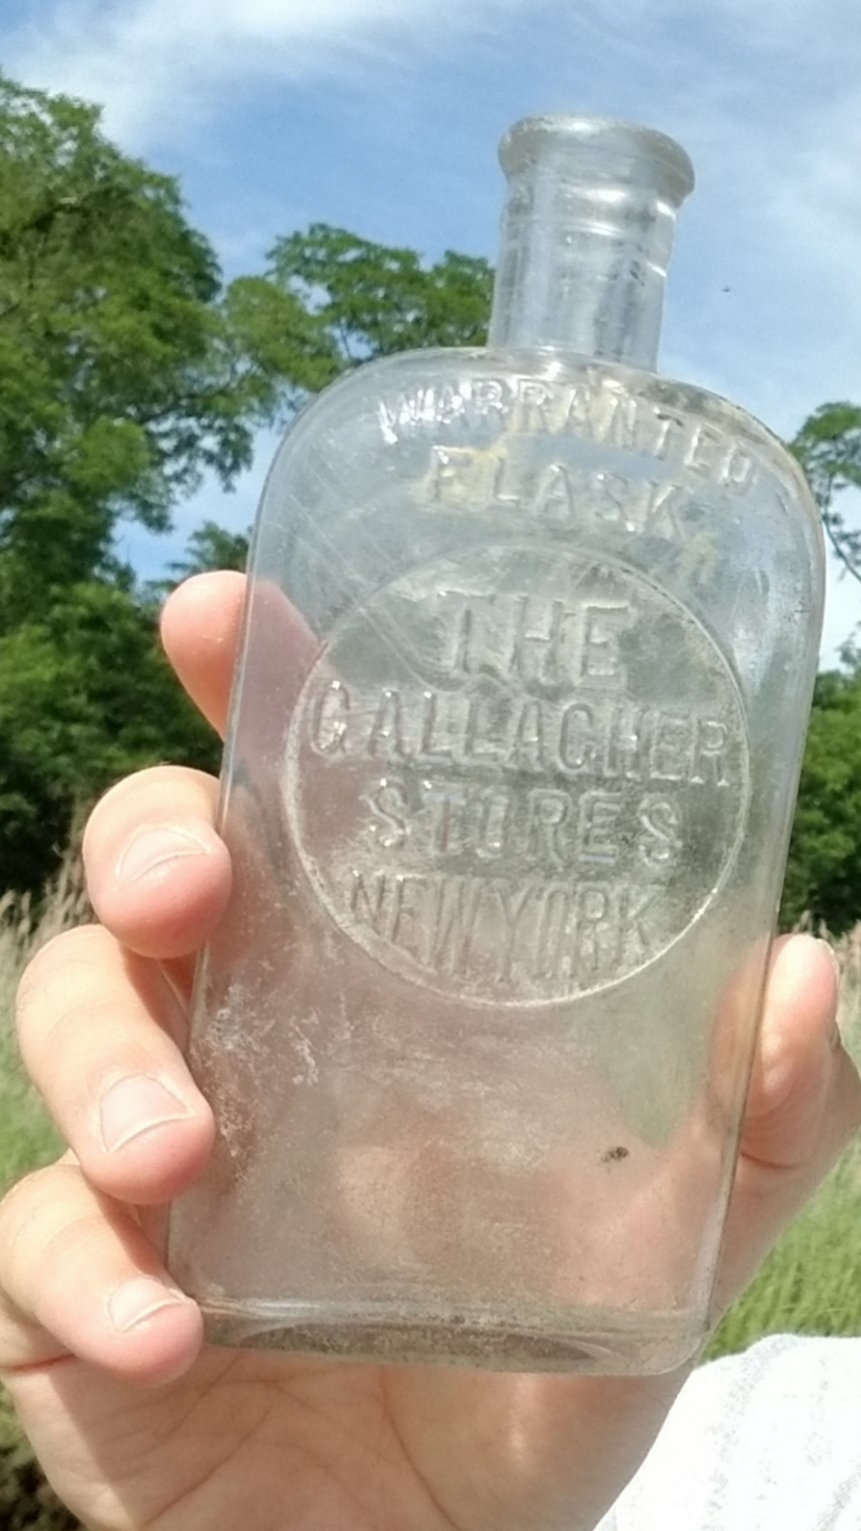 The Gallagher Stores Flask